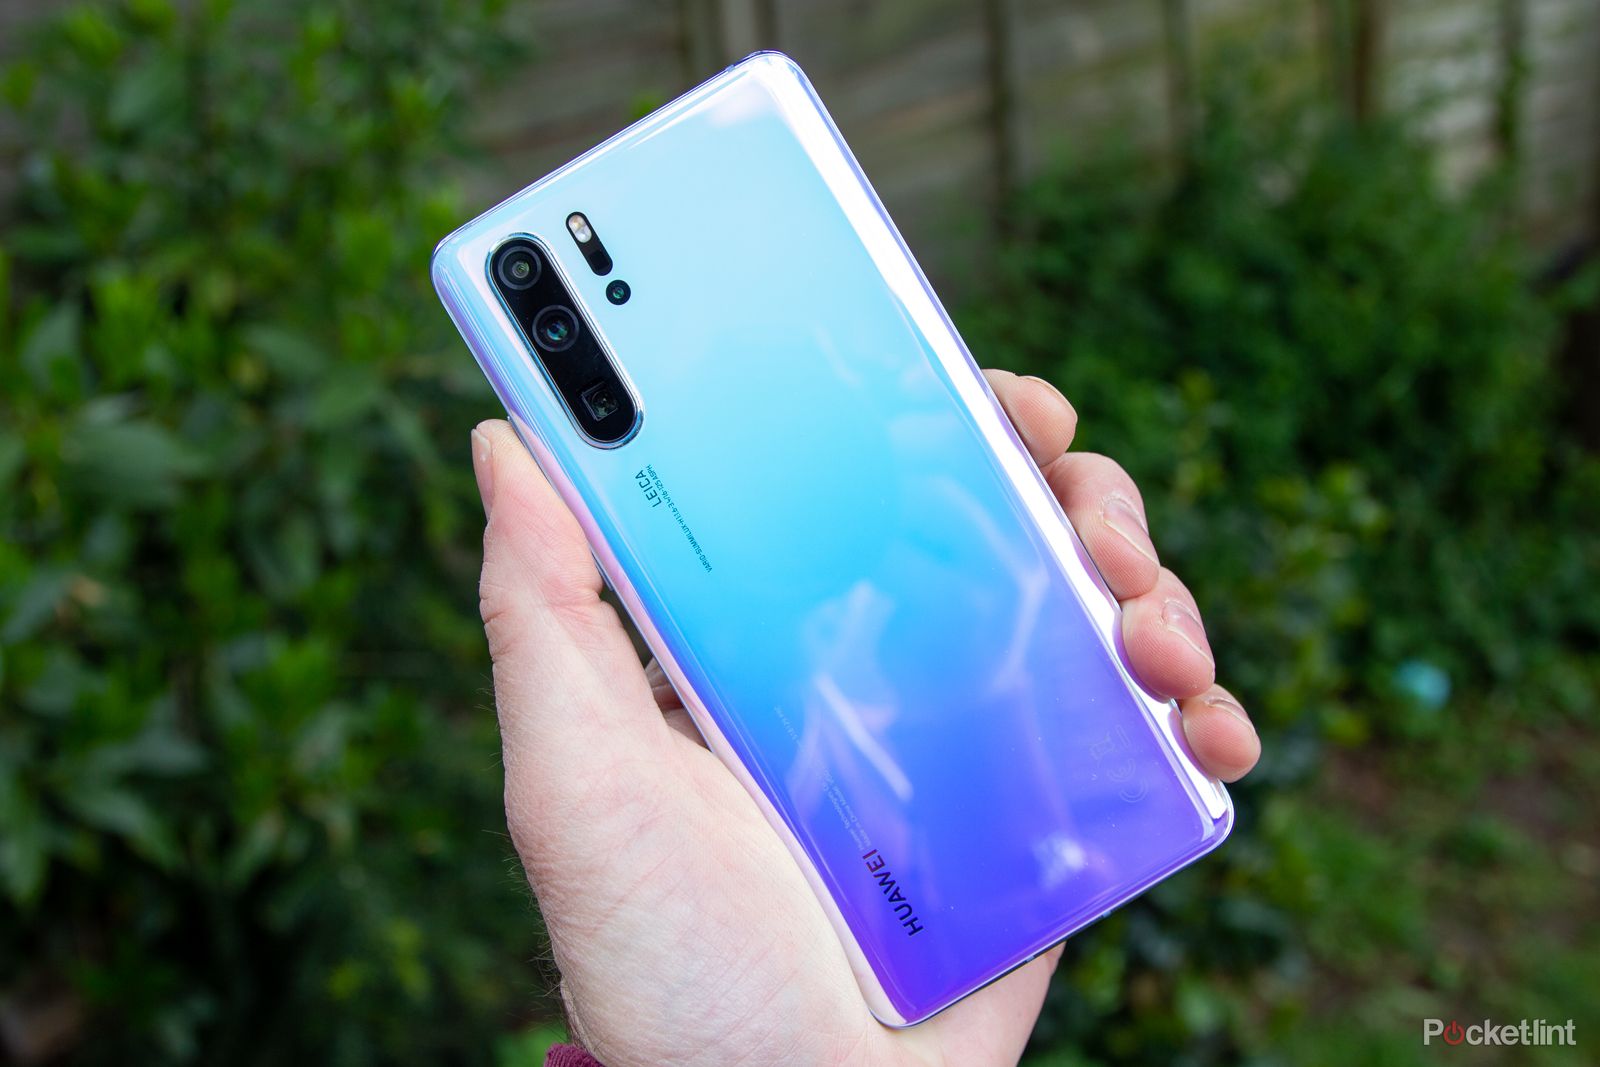 The Huawei P30 Pro New Edition is the ultimate protest phone image 1